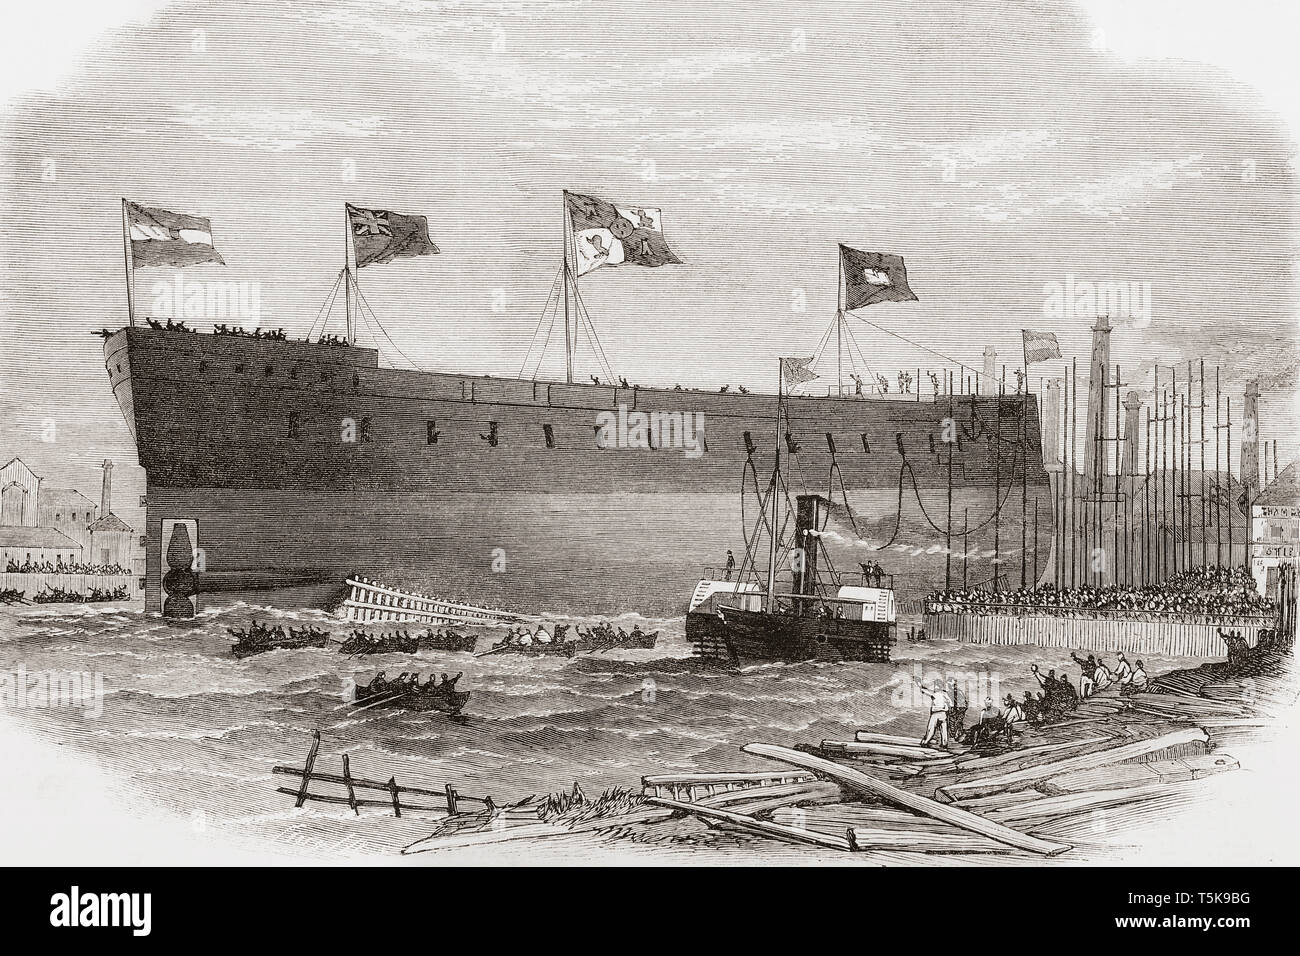 The launch of the Victoria, iron-clad frigate built for the Queen of Spain at Blackwall Yard, River Thames, London, England, 1865.  From The Illustrated London News, published 1865. Stock Photo